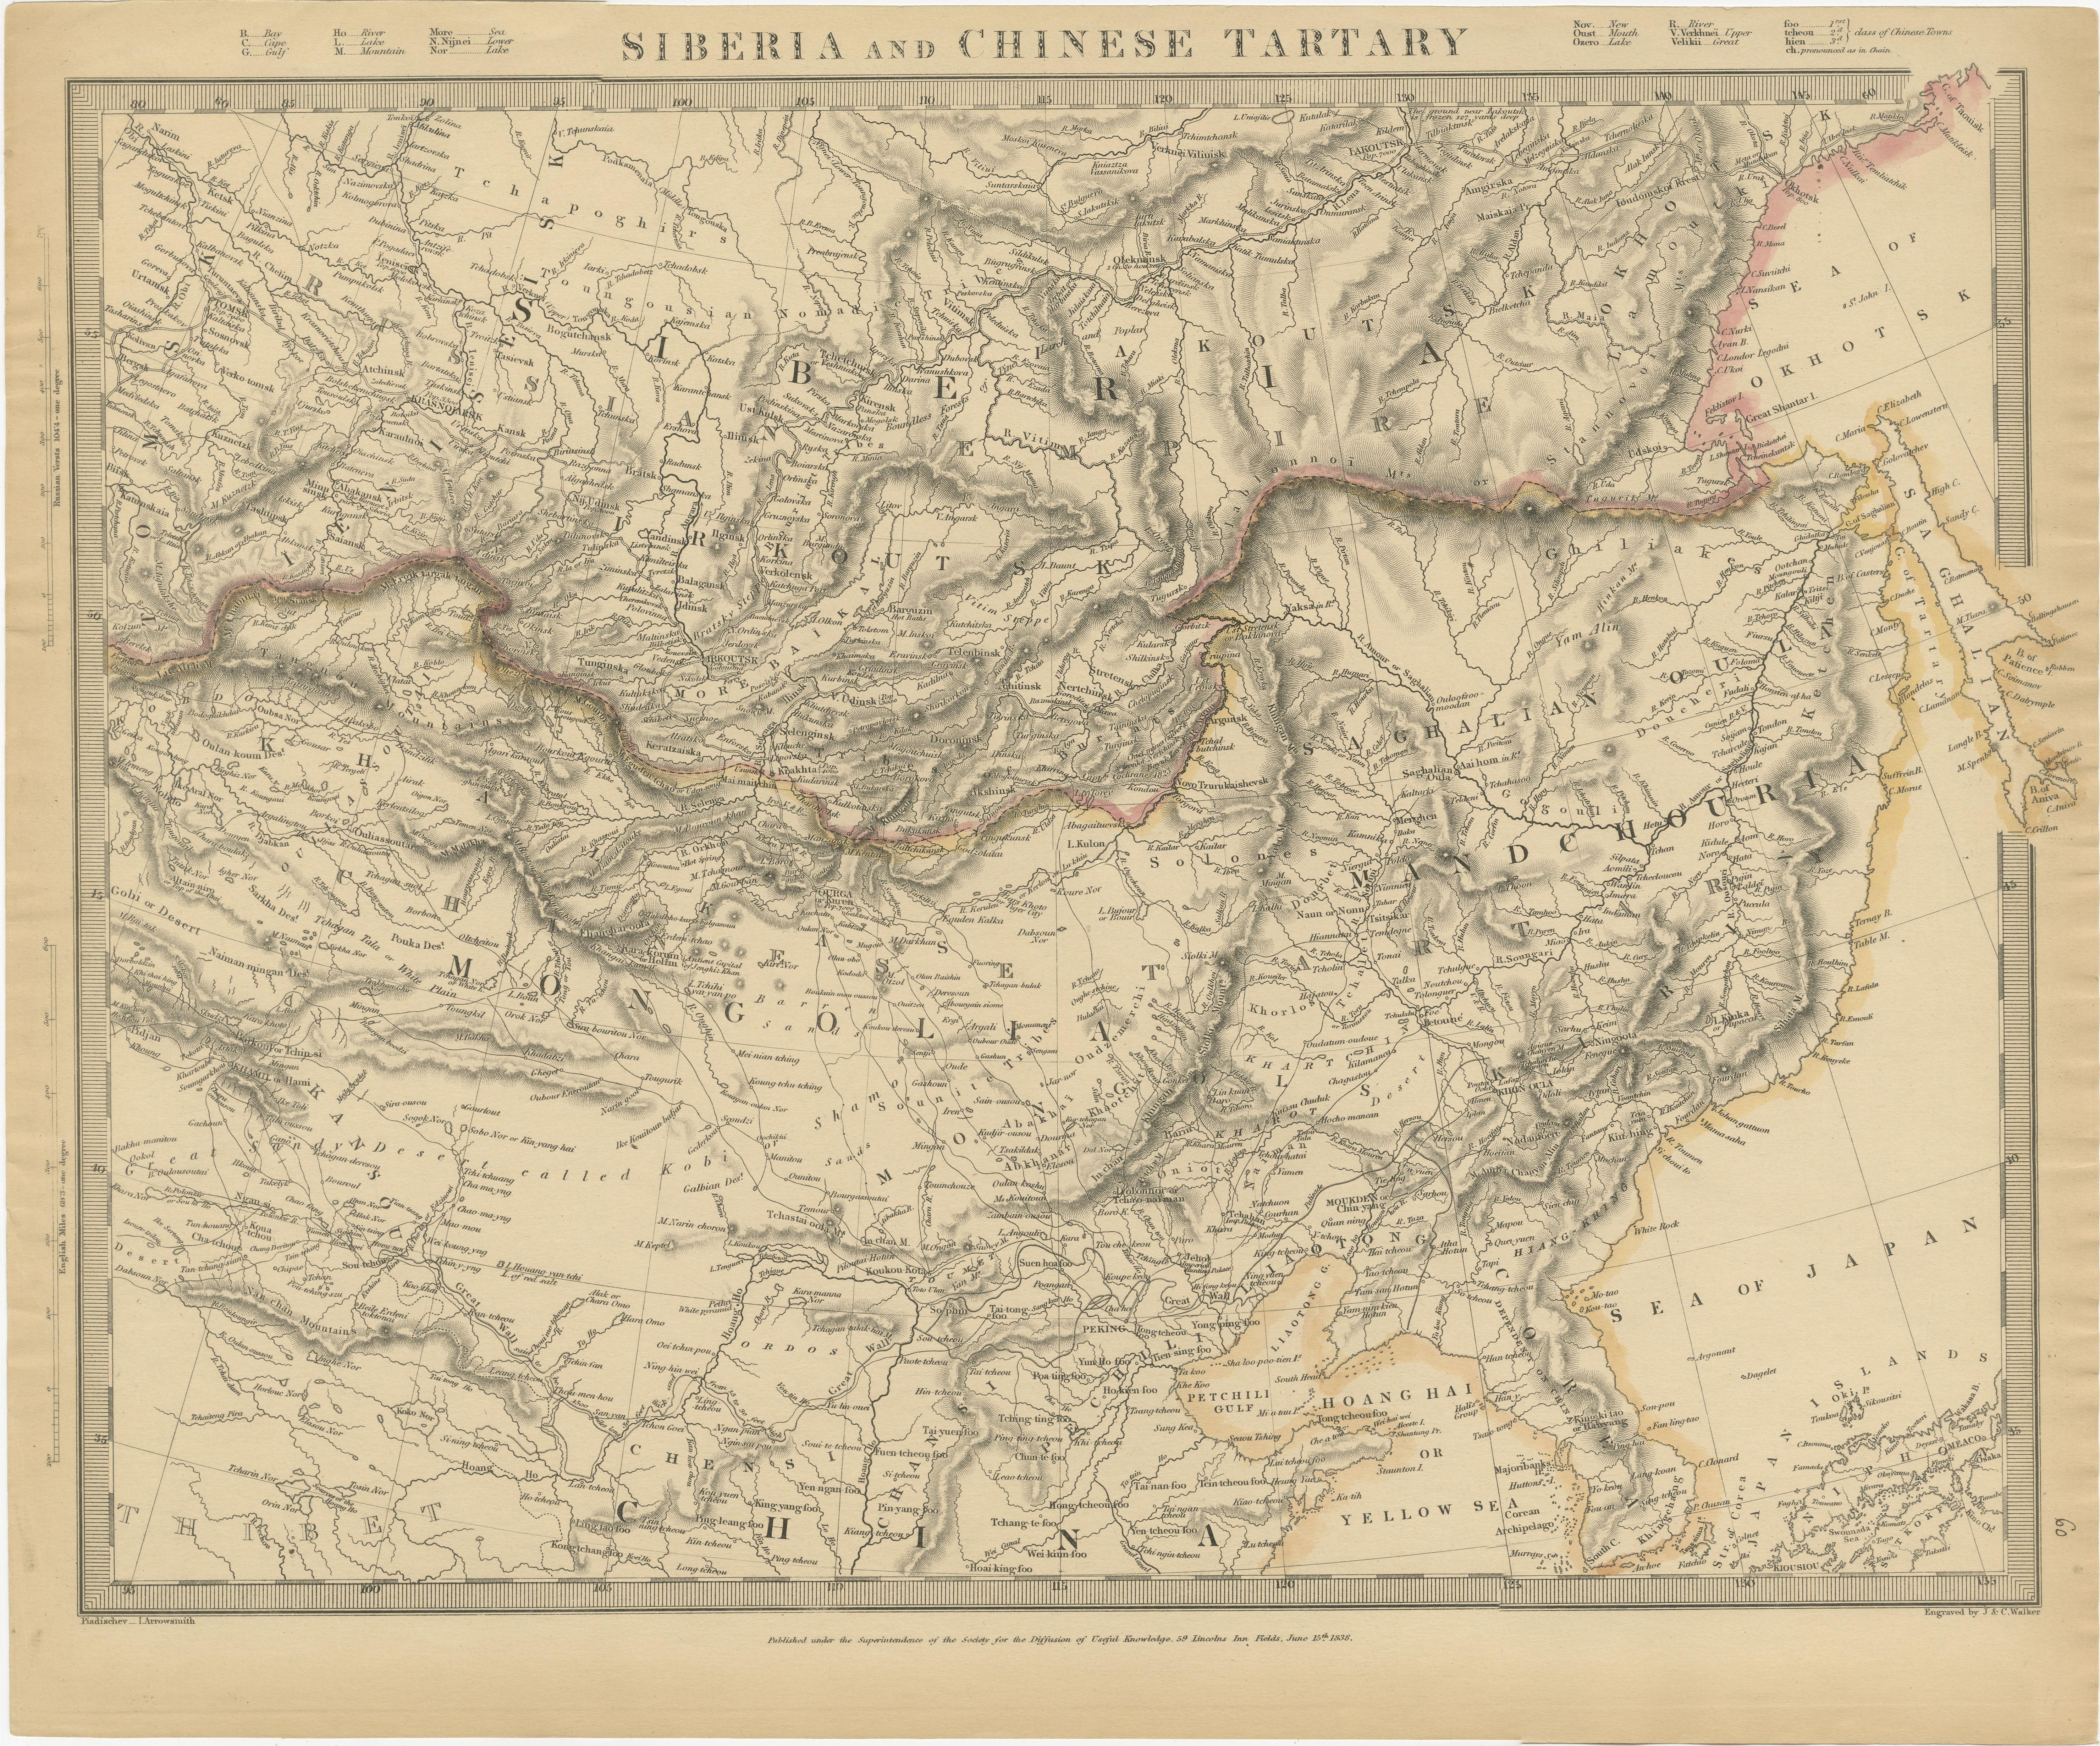 Antique map titled 'Siberia and Chinese Tartary'. Detailed antique map of the region of Siberia, Mongolia and Manchuria. Engraved by J. & C. Walker. Published 1838. 